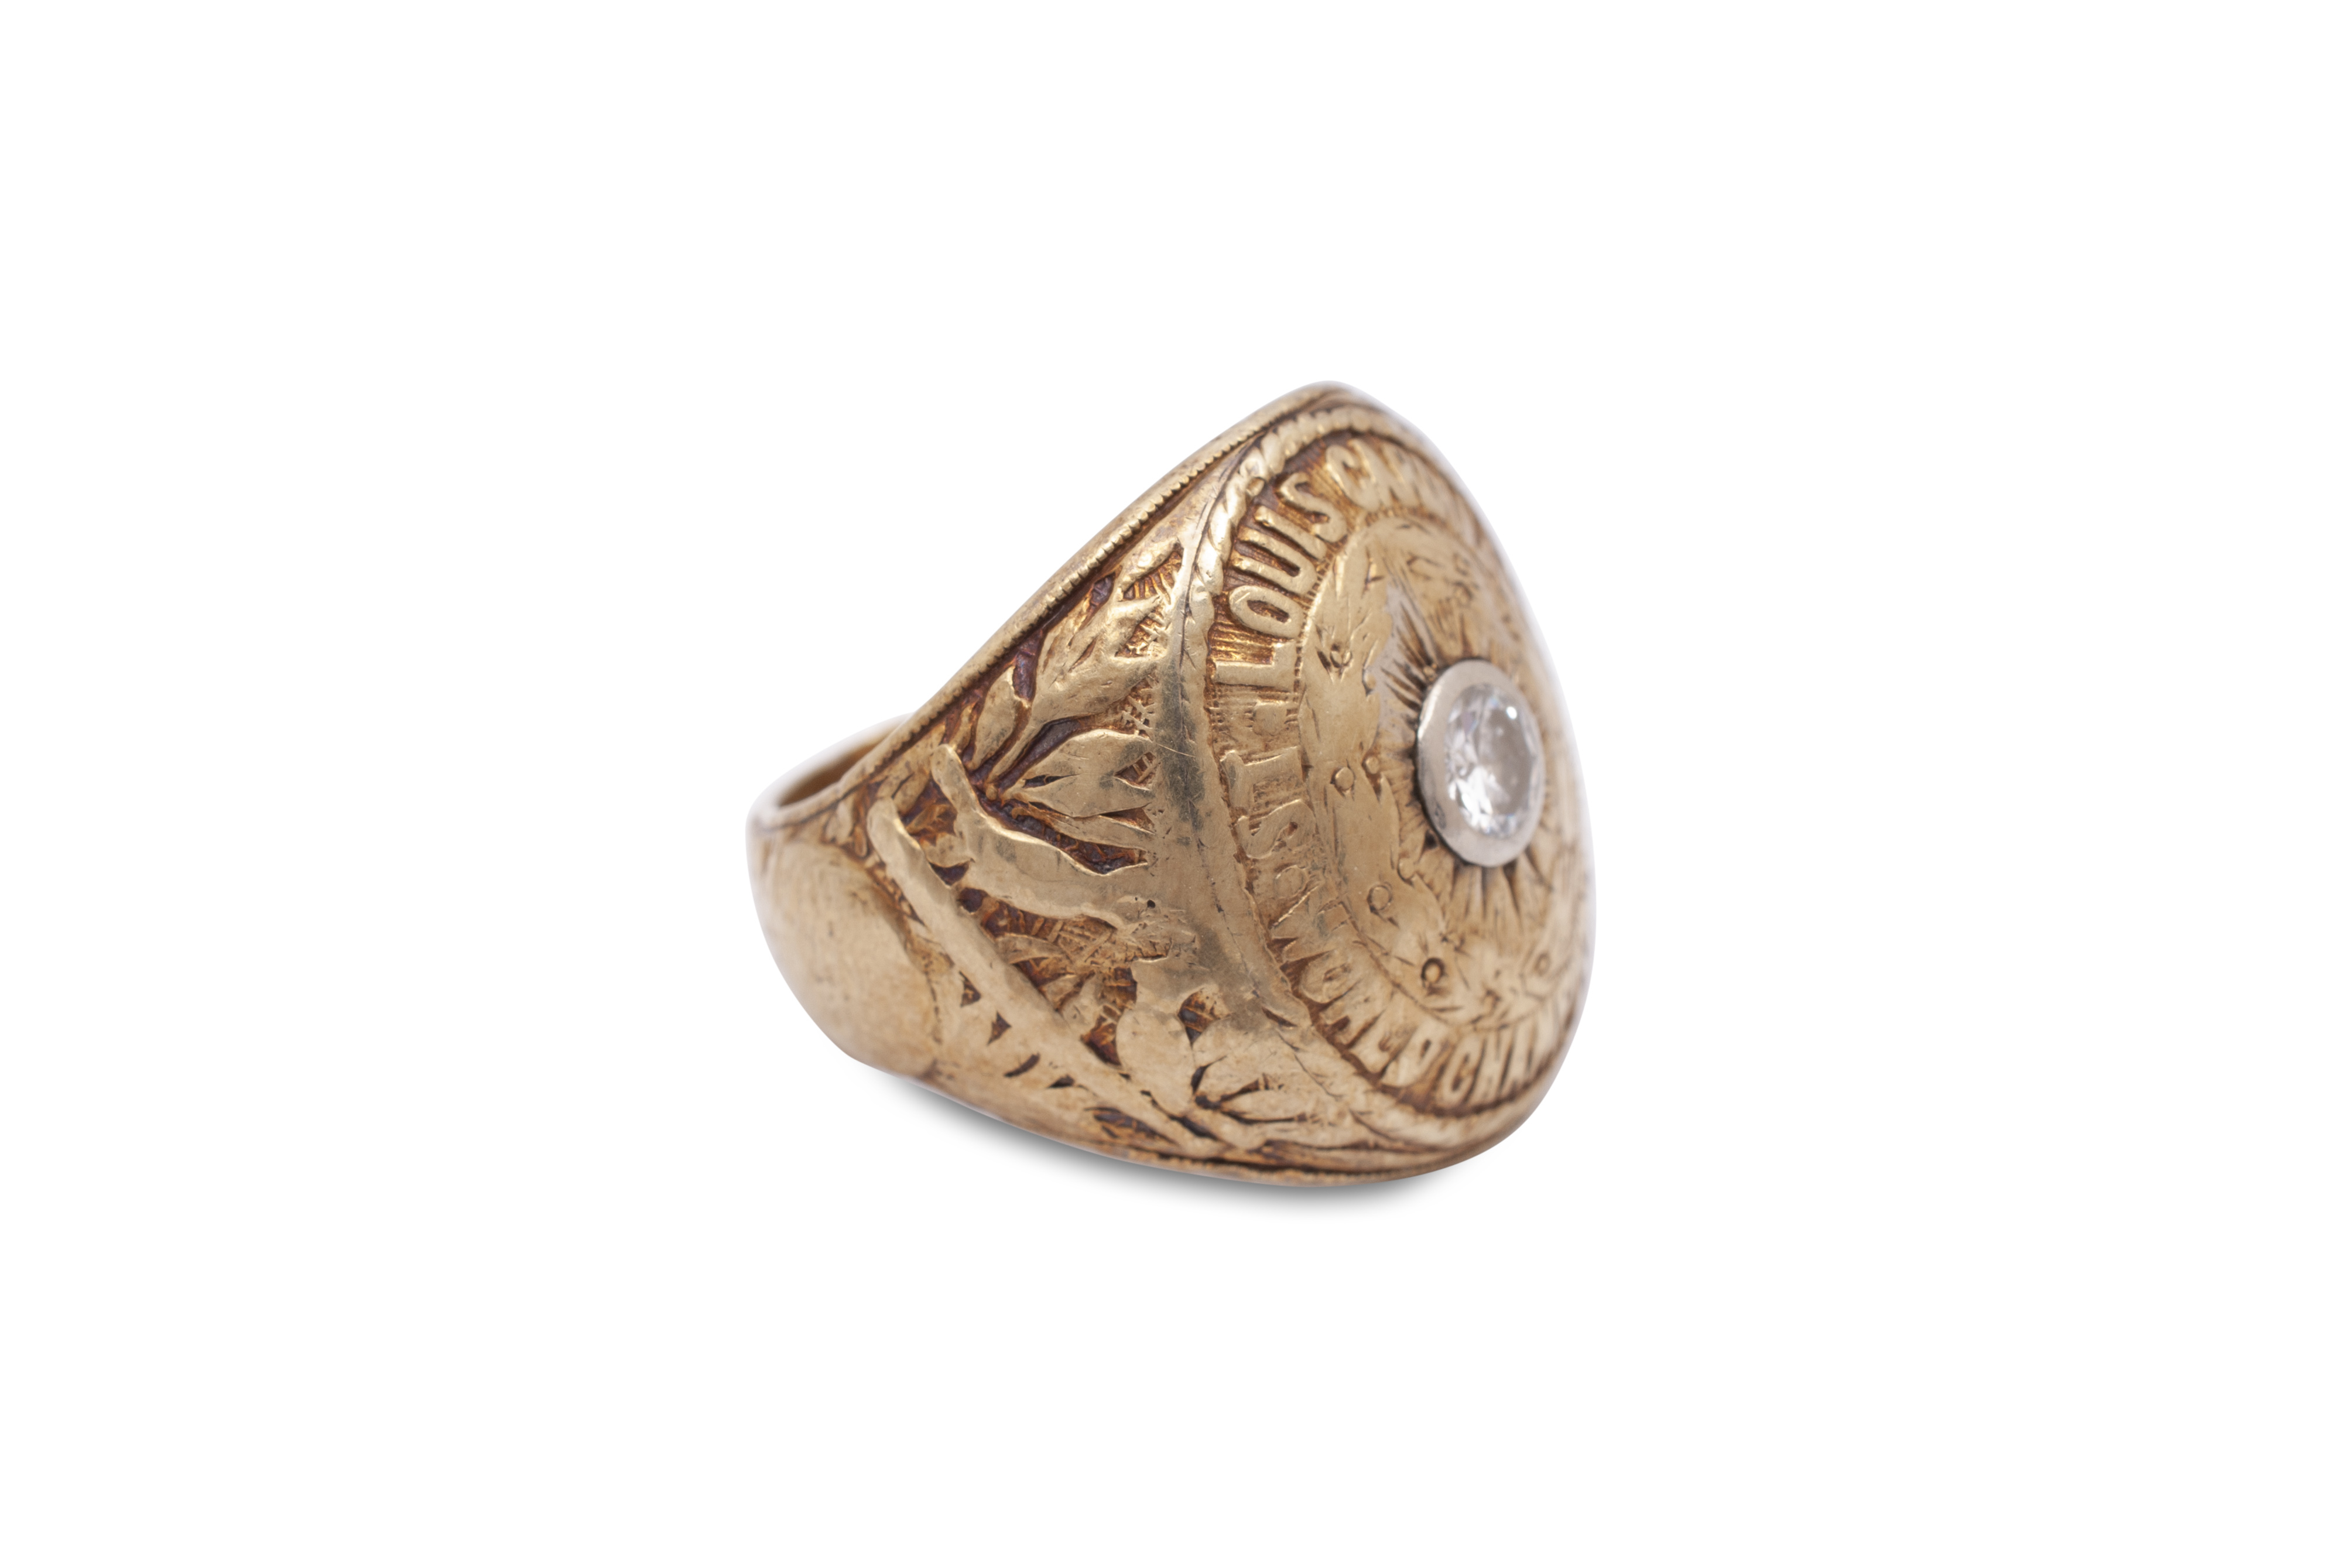 St. Louis Cardinals 1926 Hornsby Championship Ring